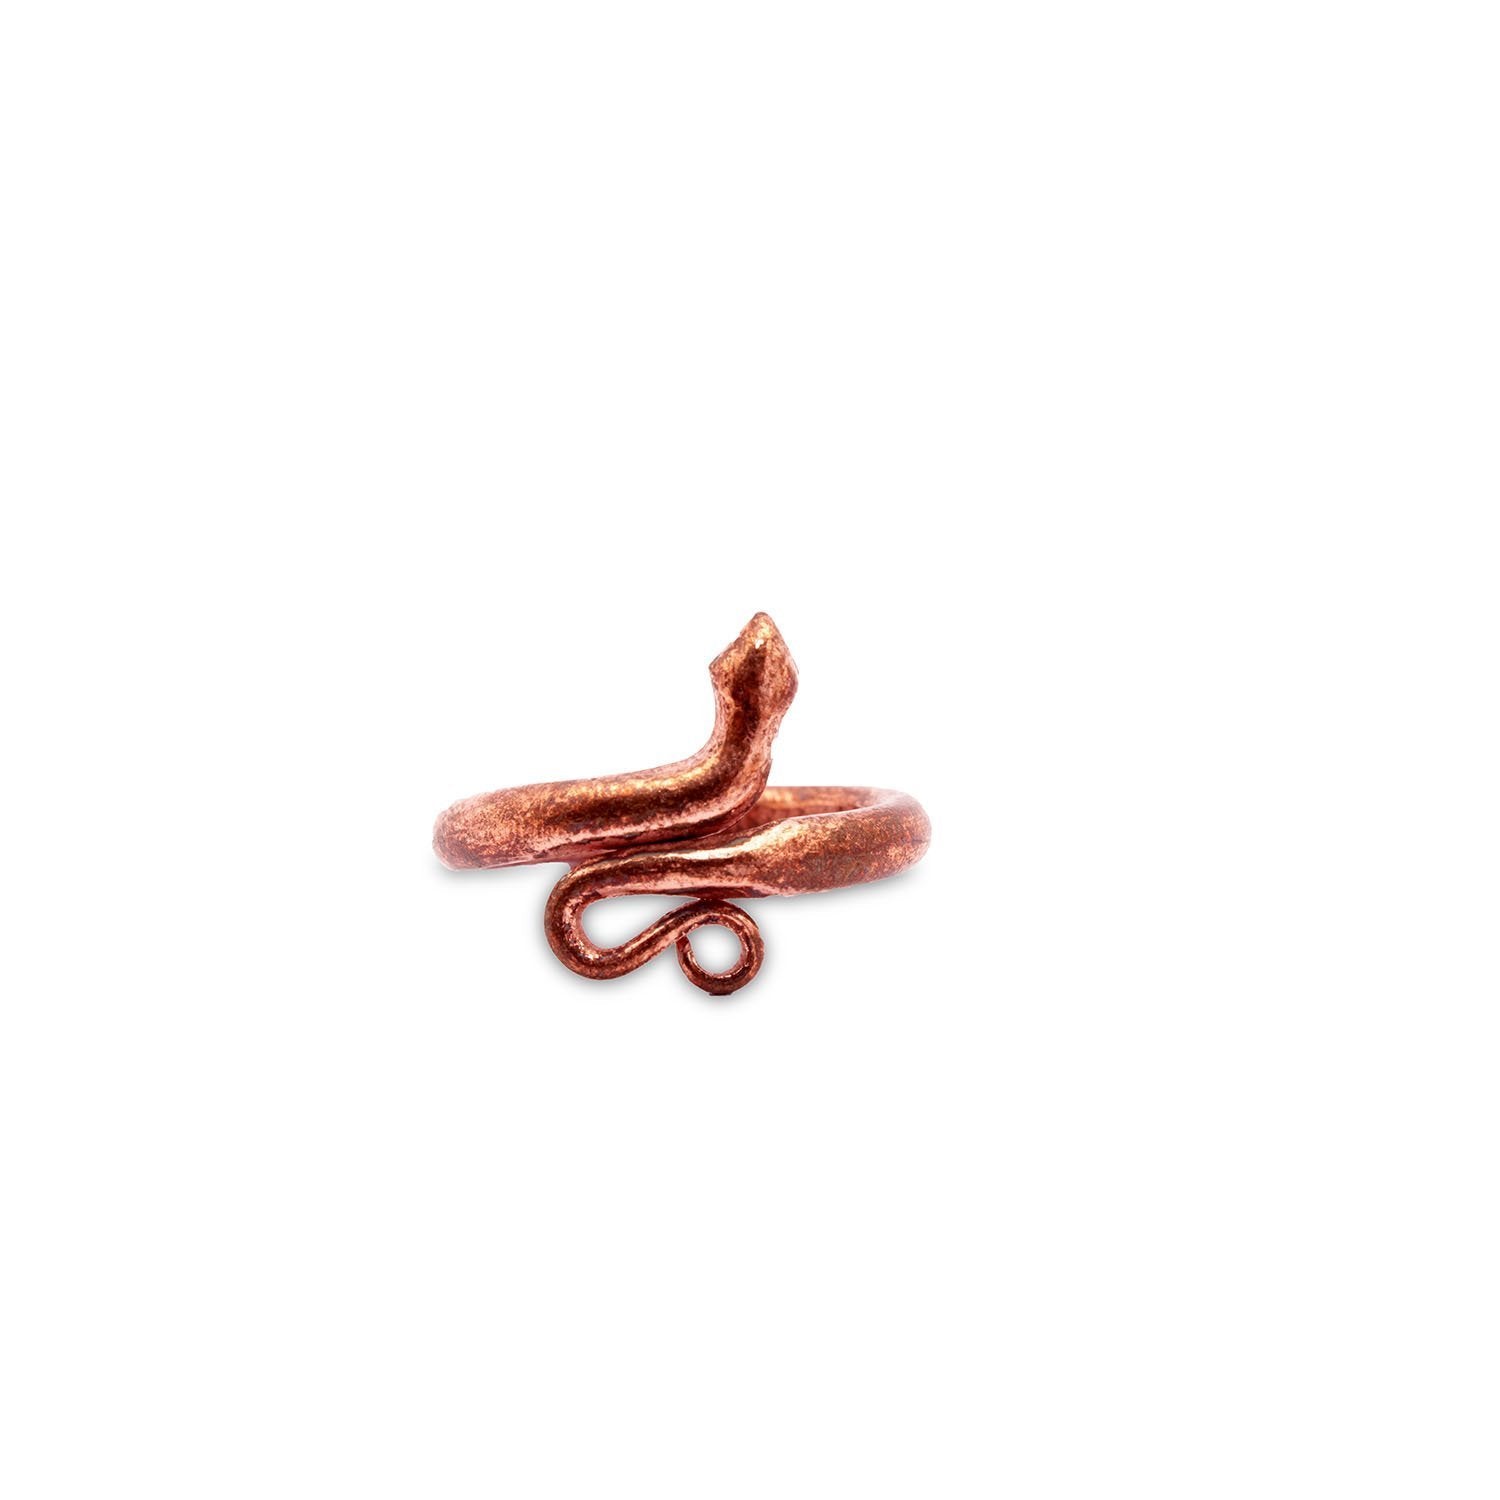 Isha Life Consecrated Copper Ring Sarpa Sutra Snake Rings Small Size | eBay